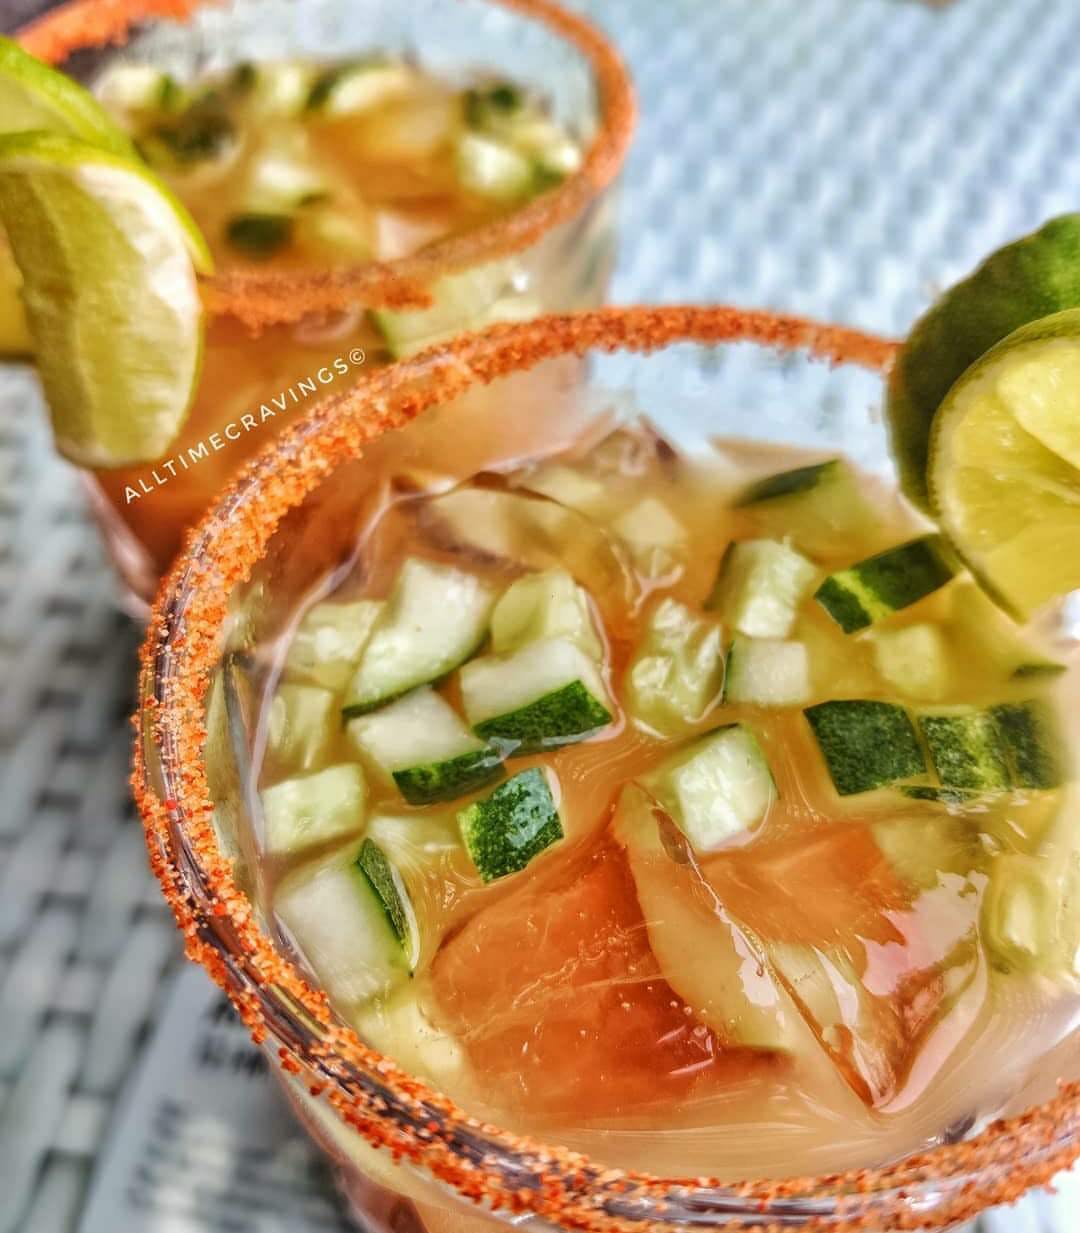 Food,Dish,Ingredient,Cuisine,Lime,Produce,Garnish,Punch,Moscow mule,Drink